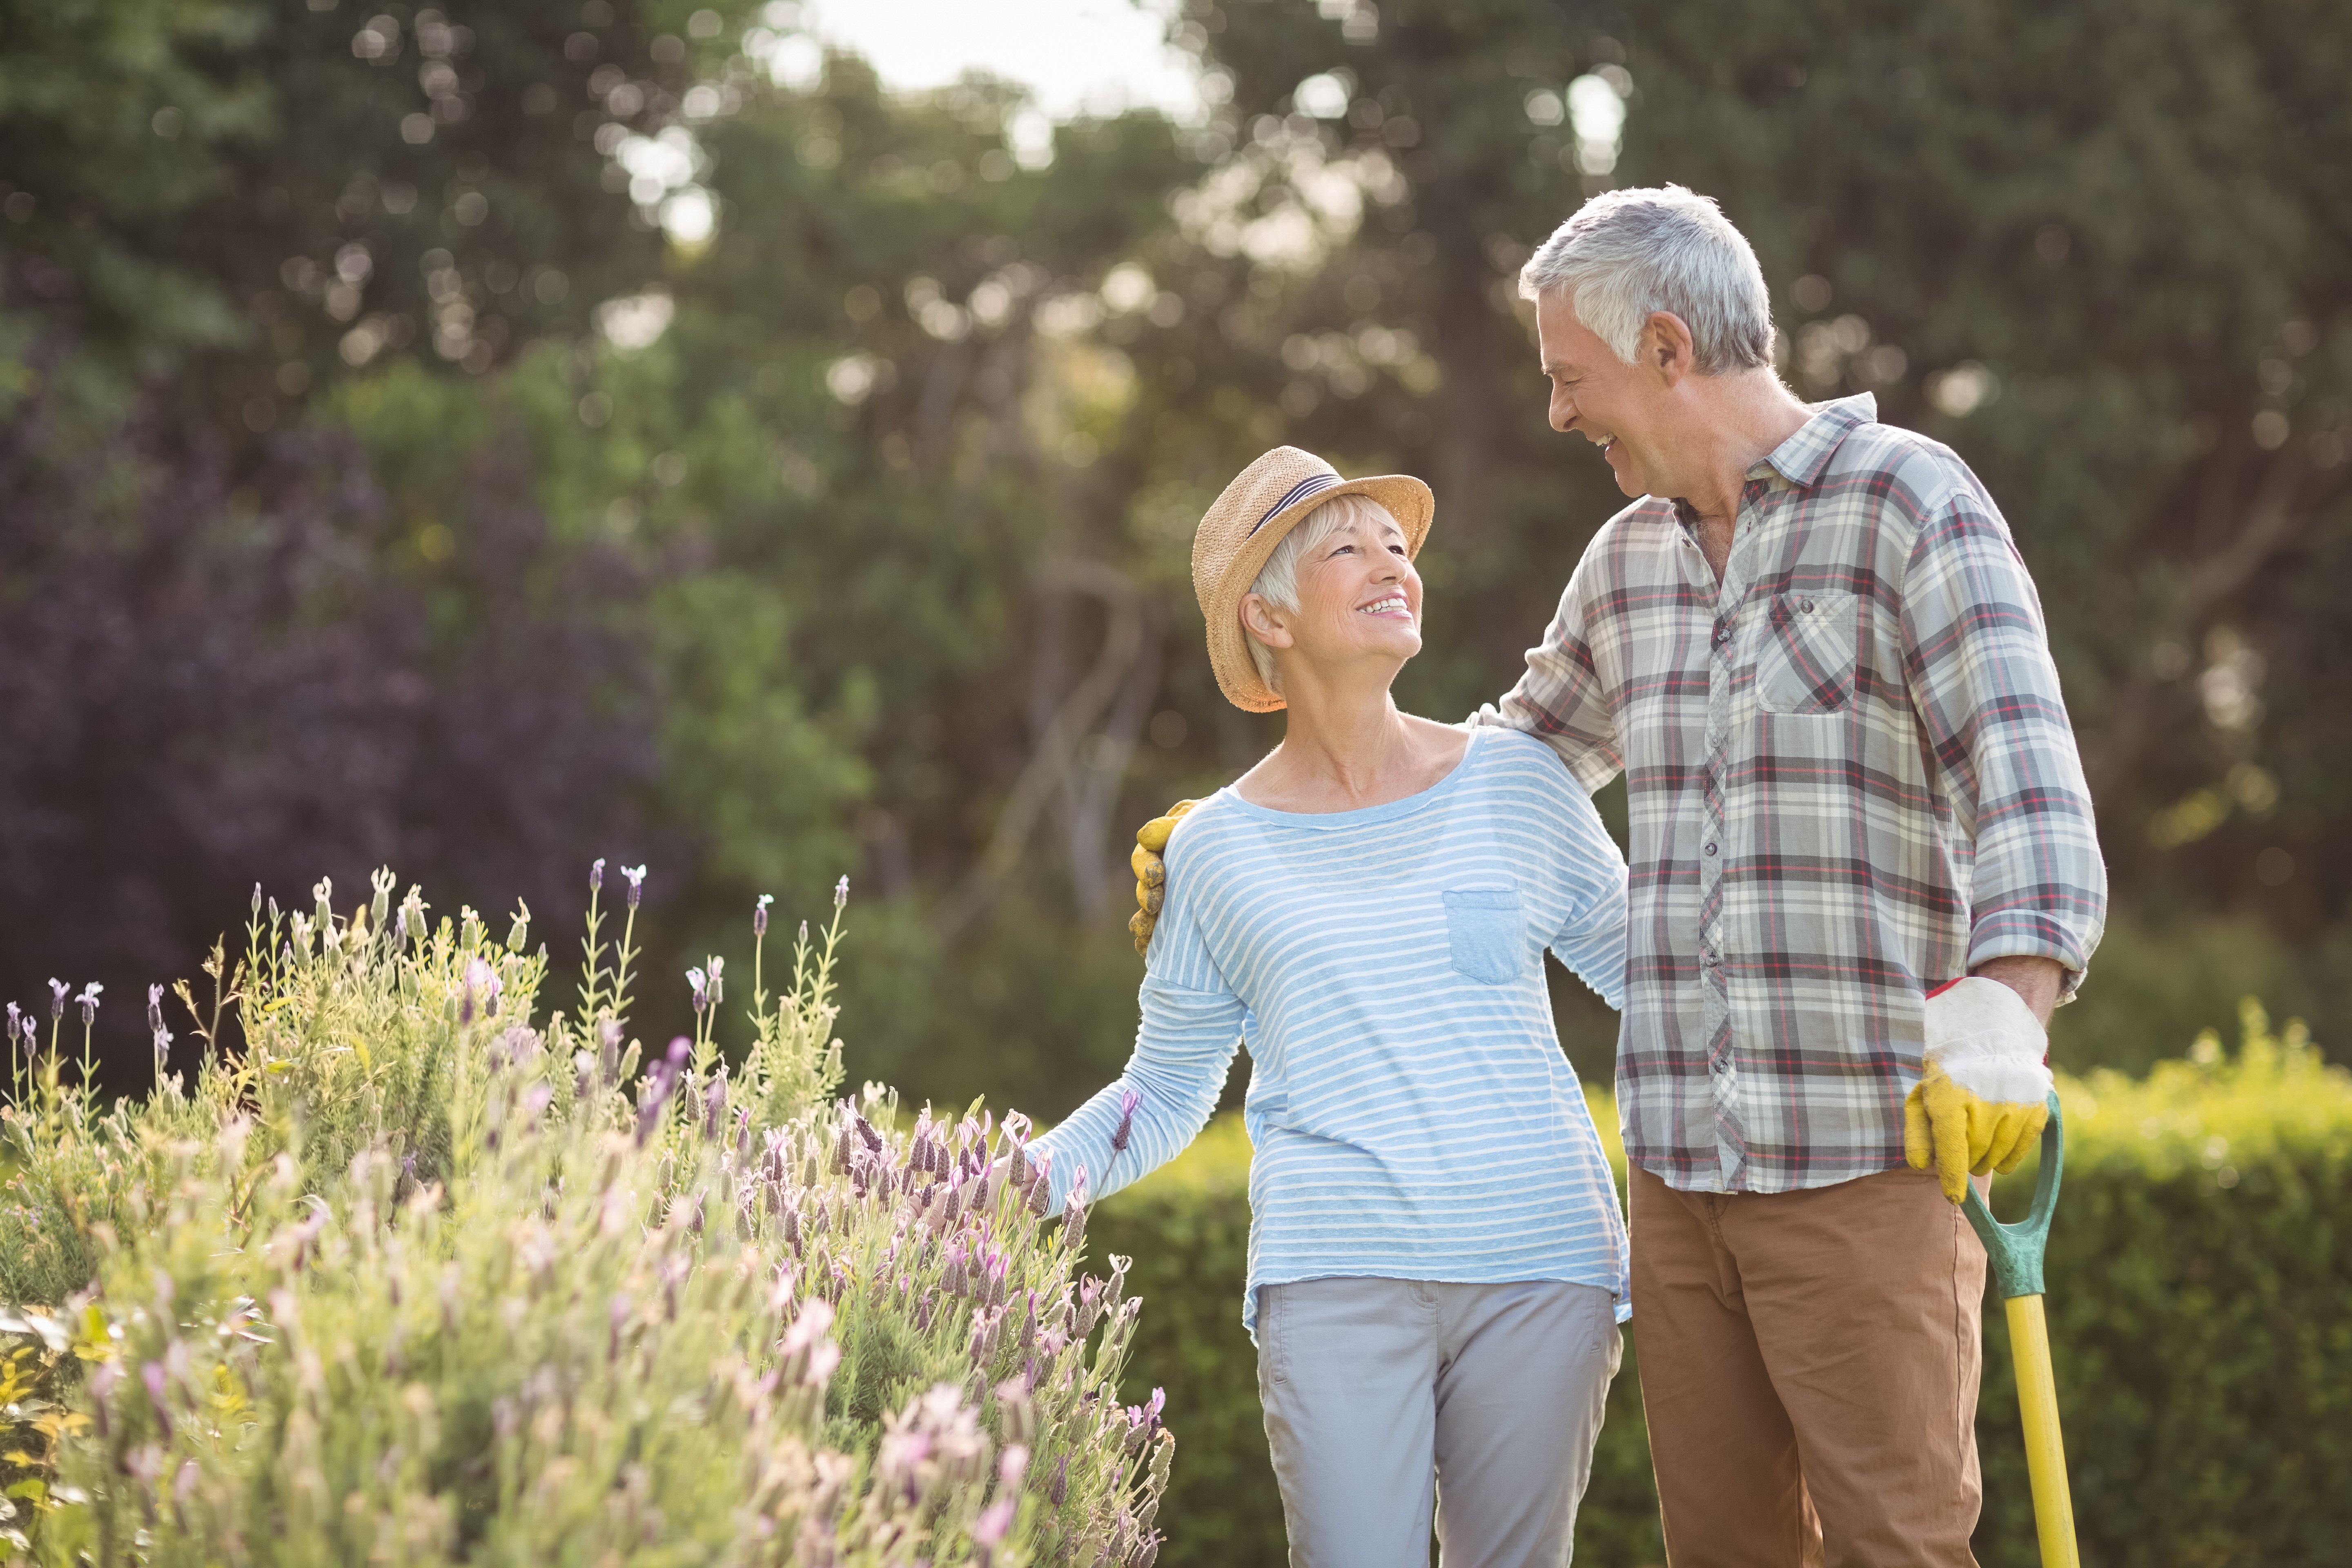 A happy mature man and woman in a garden |Source: Shutterstock